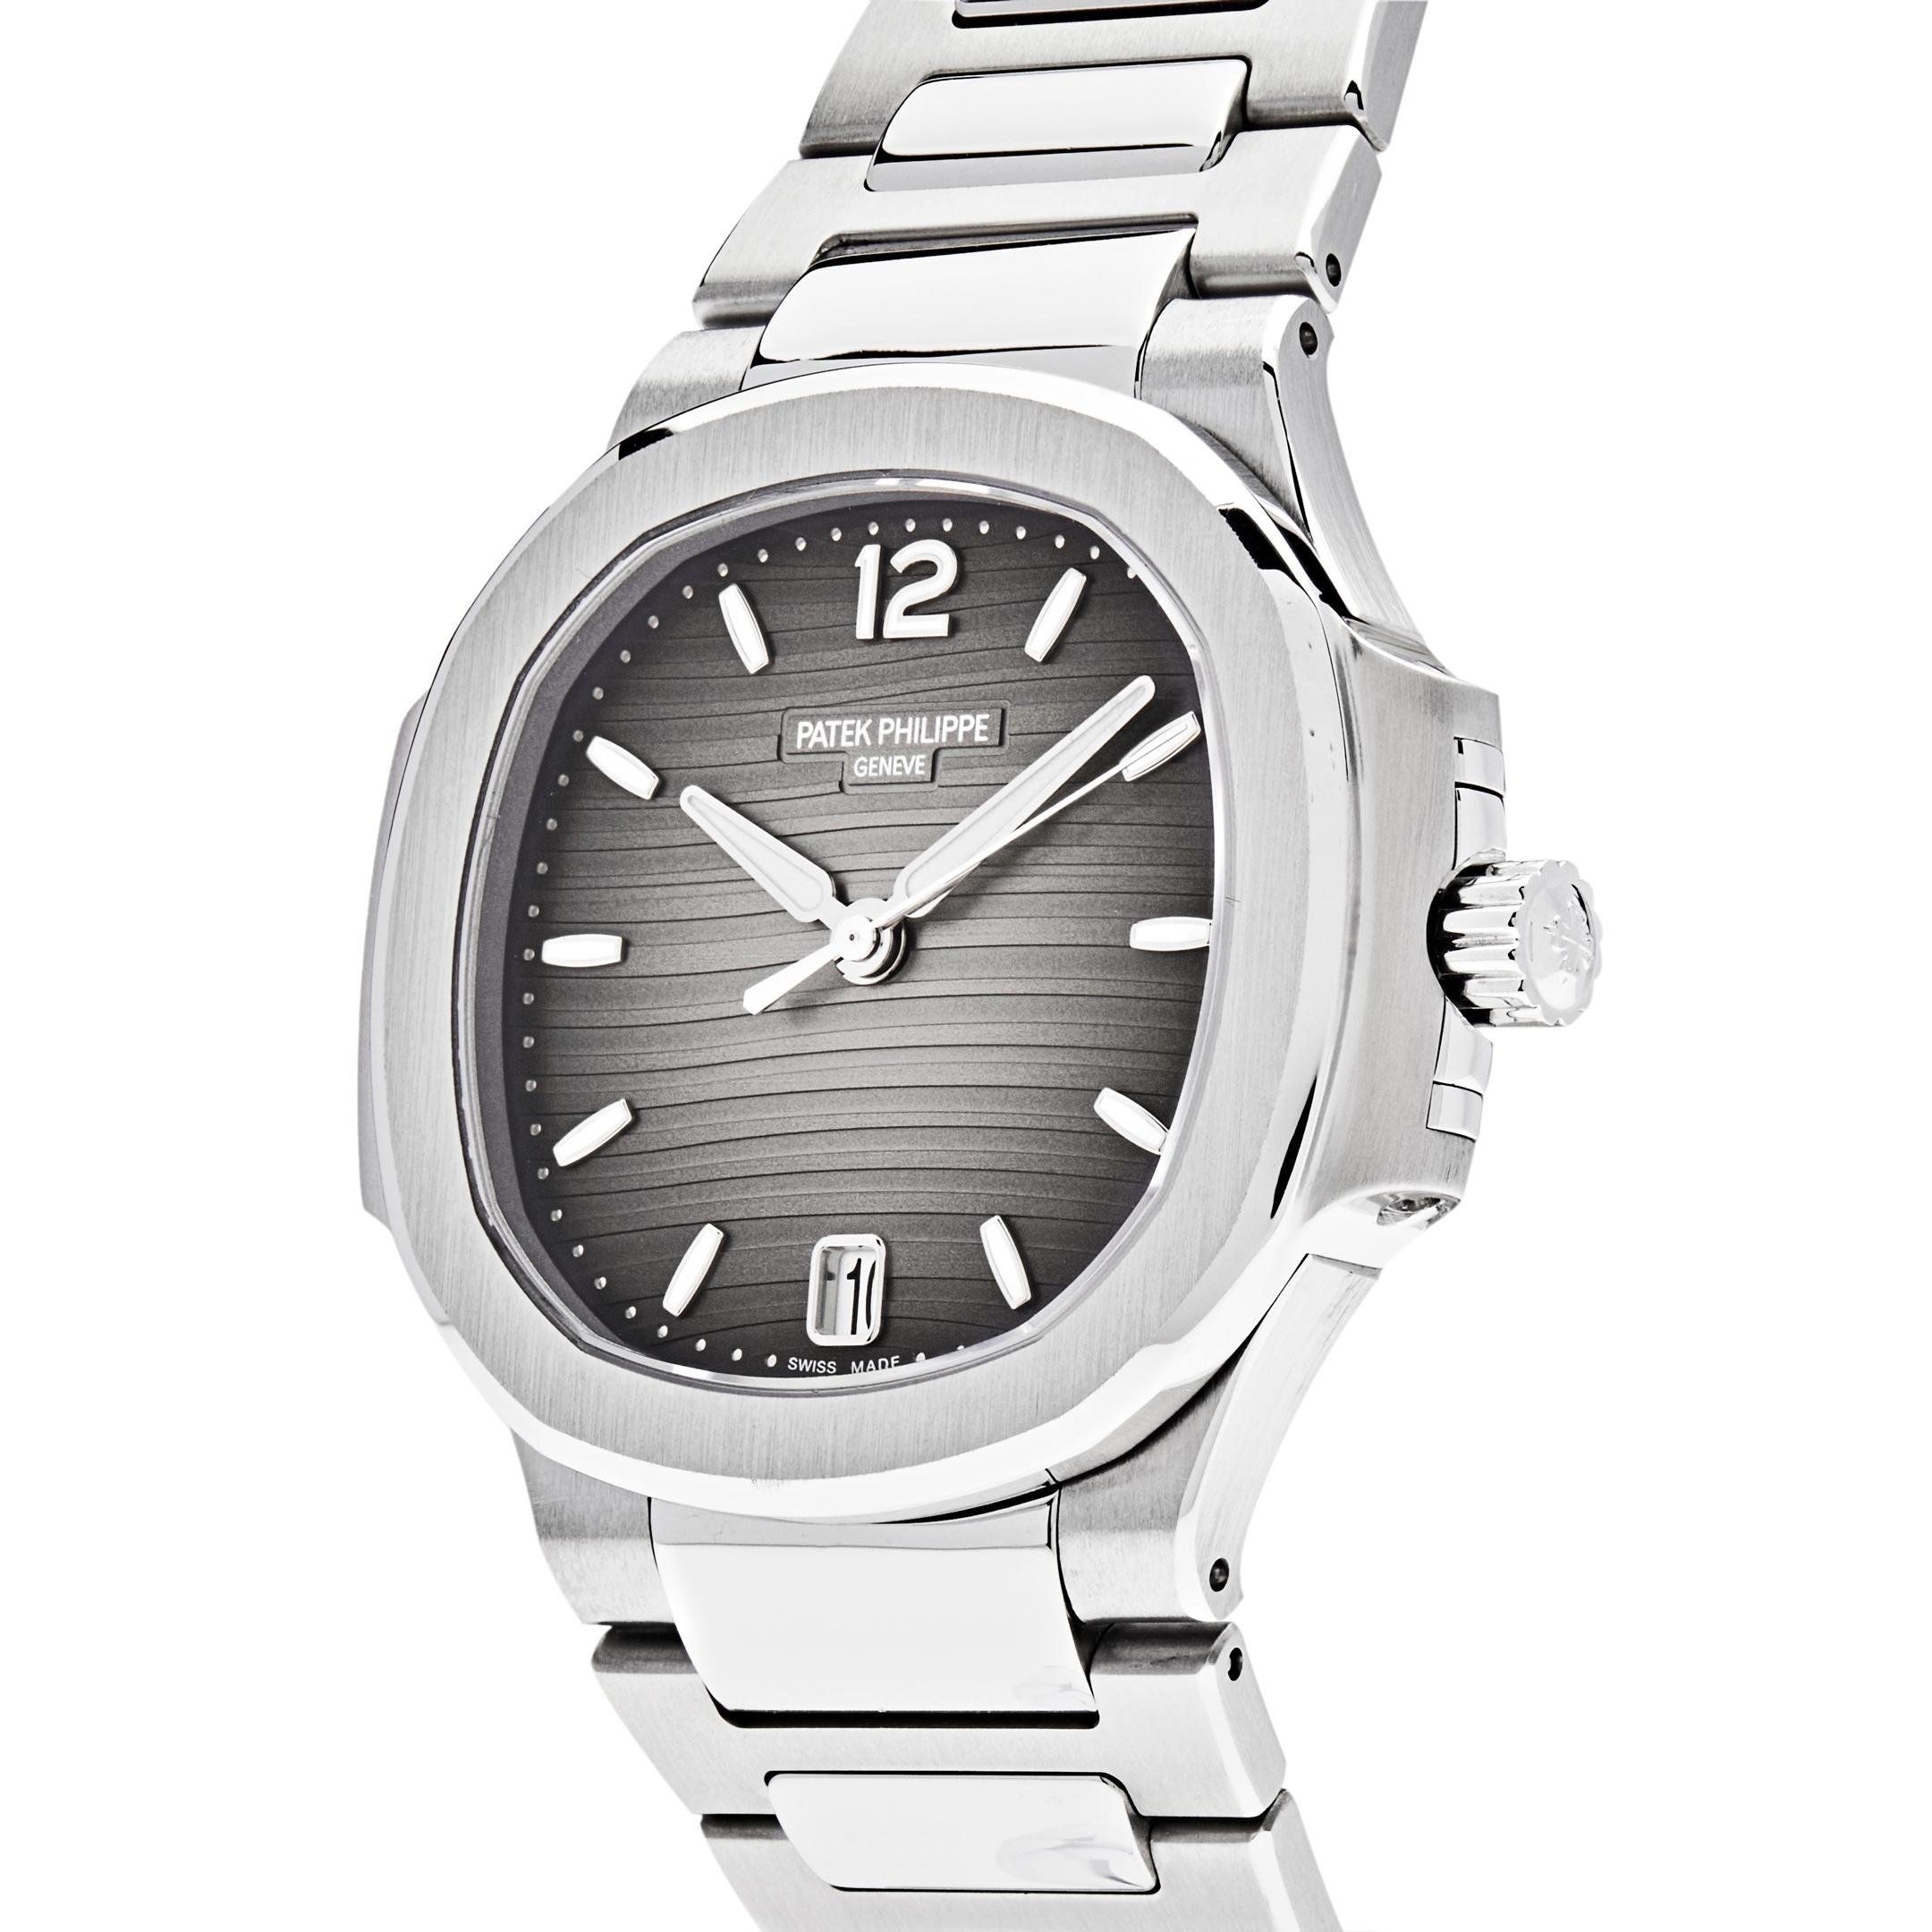 This Patek Philippe Ladies Nautilus wristwatch features a 35mm stainless steel case and bezel. In the center, lays a smoke grey dial with gold applied numerals and hour markers. It is finished with a stainless steel bracelet and fold-over clasp